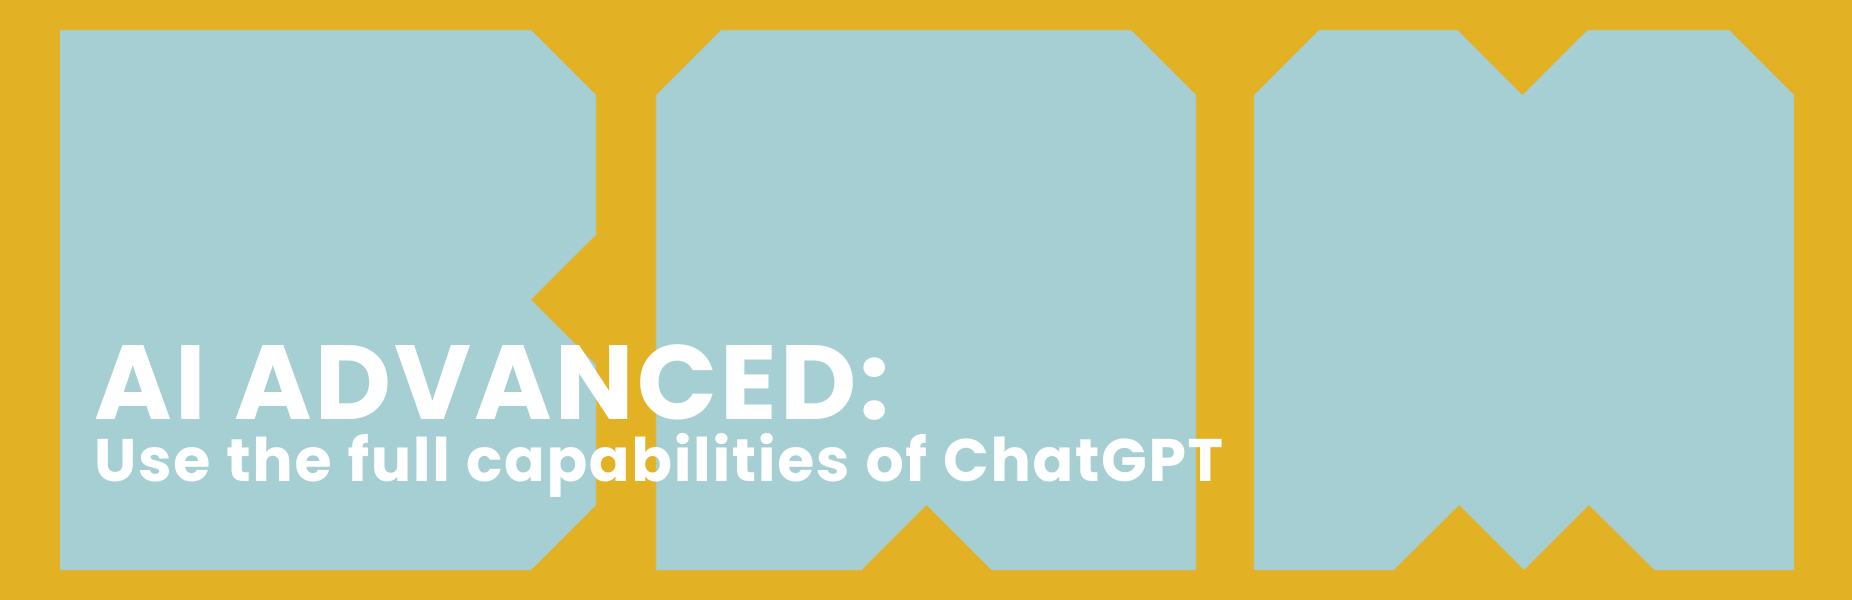 Use the full capabilities of ChatGPT